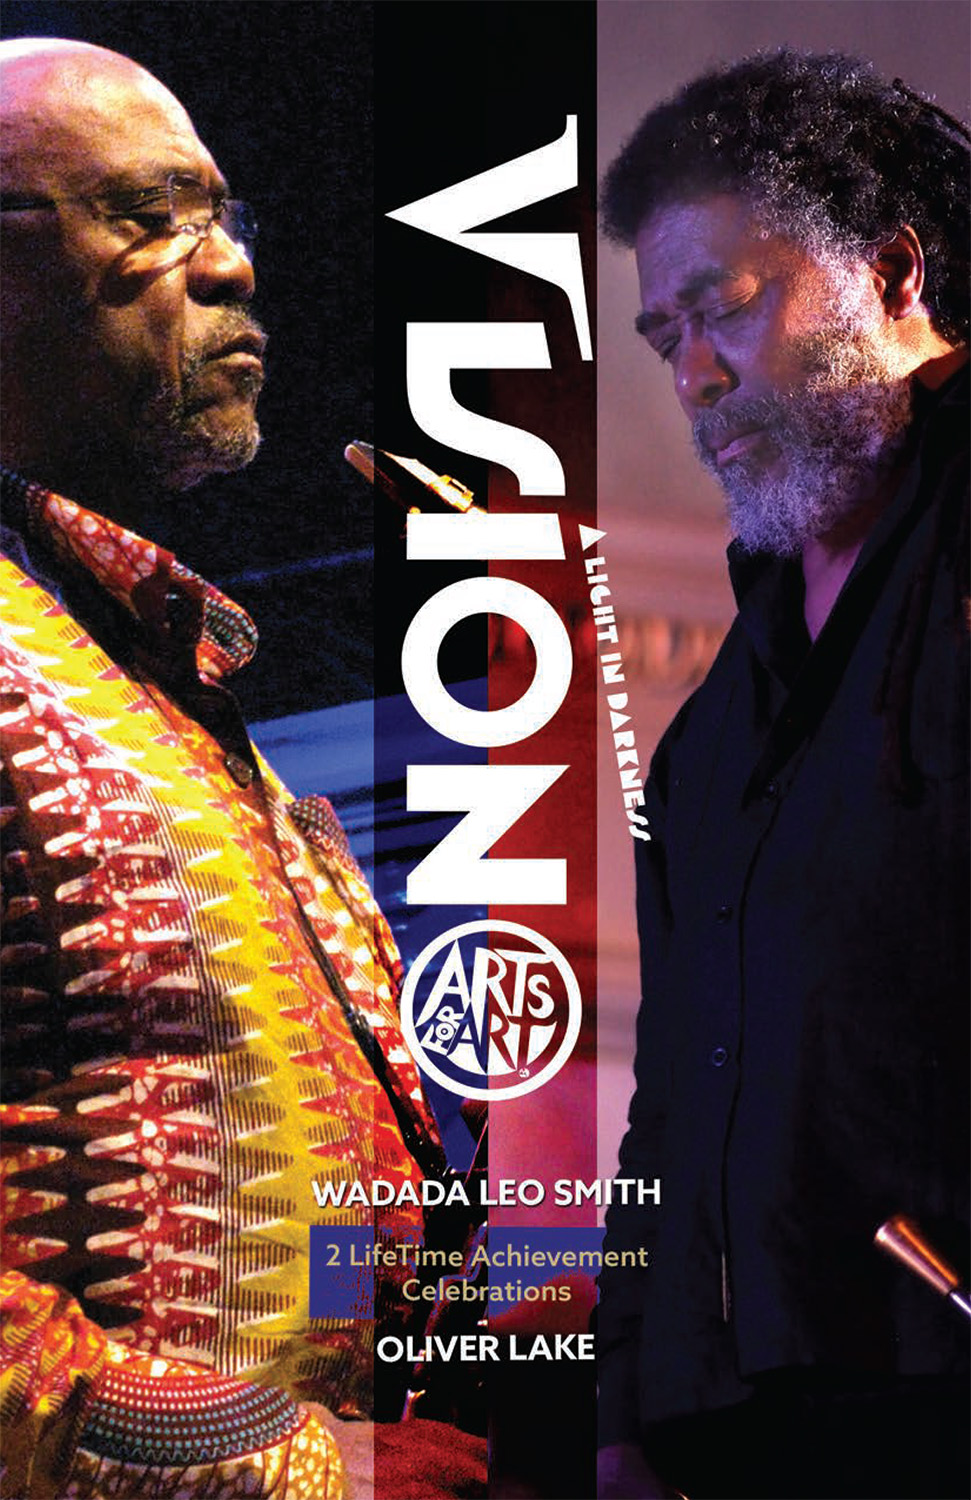 over for Vision Festival 26 brochure featuring portraits of Oliver Lake and Wadada Leo Smith and the Vision Festival logo